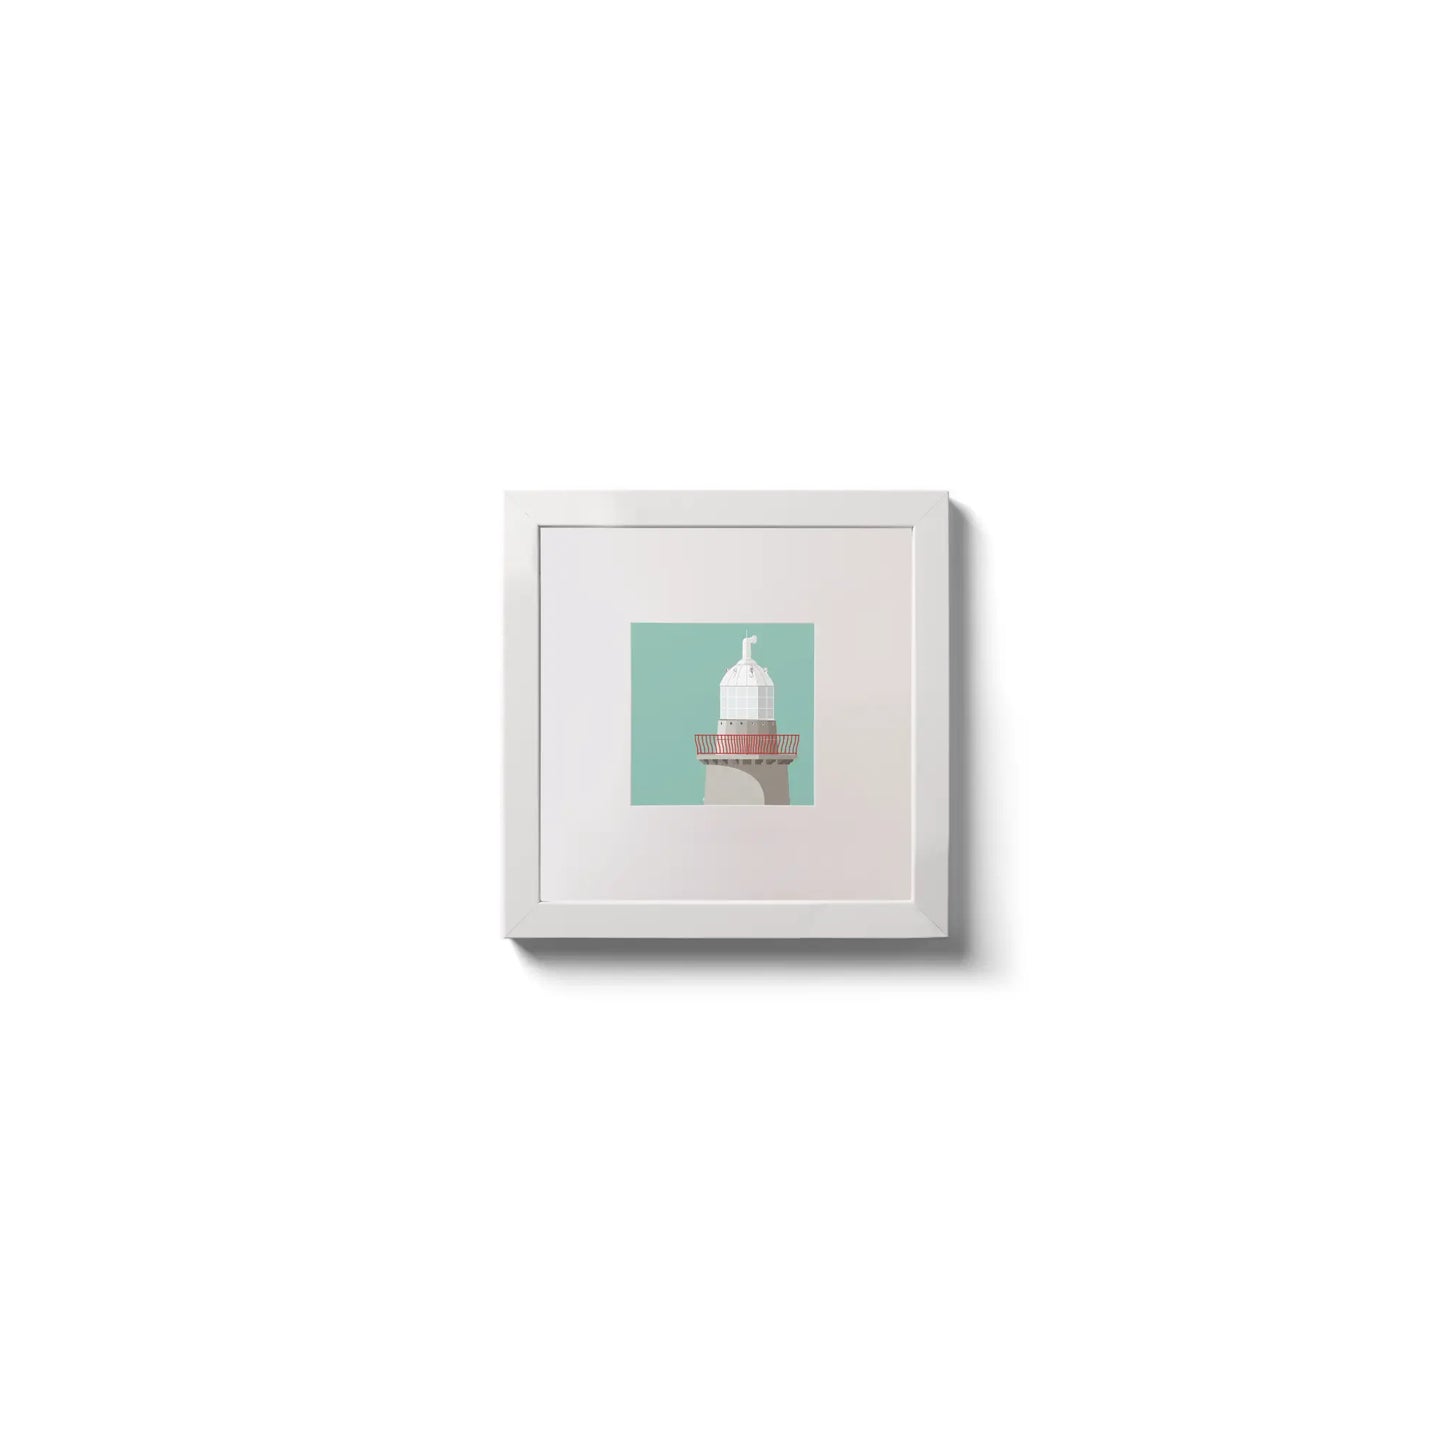 Illustration of Oyster Island lighthouse on an ocean green background,  in a white square frame measuring 10x10cm.